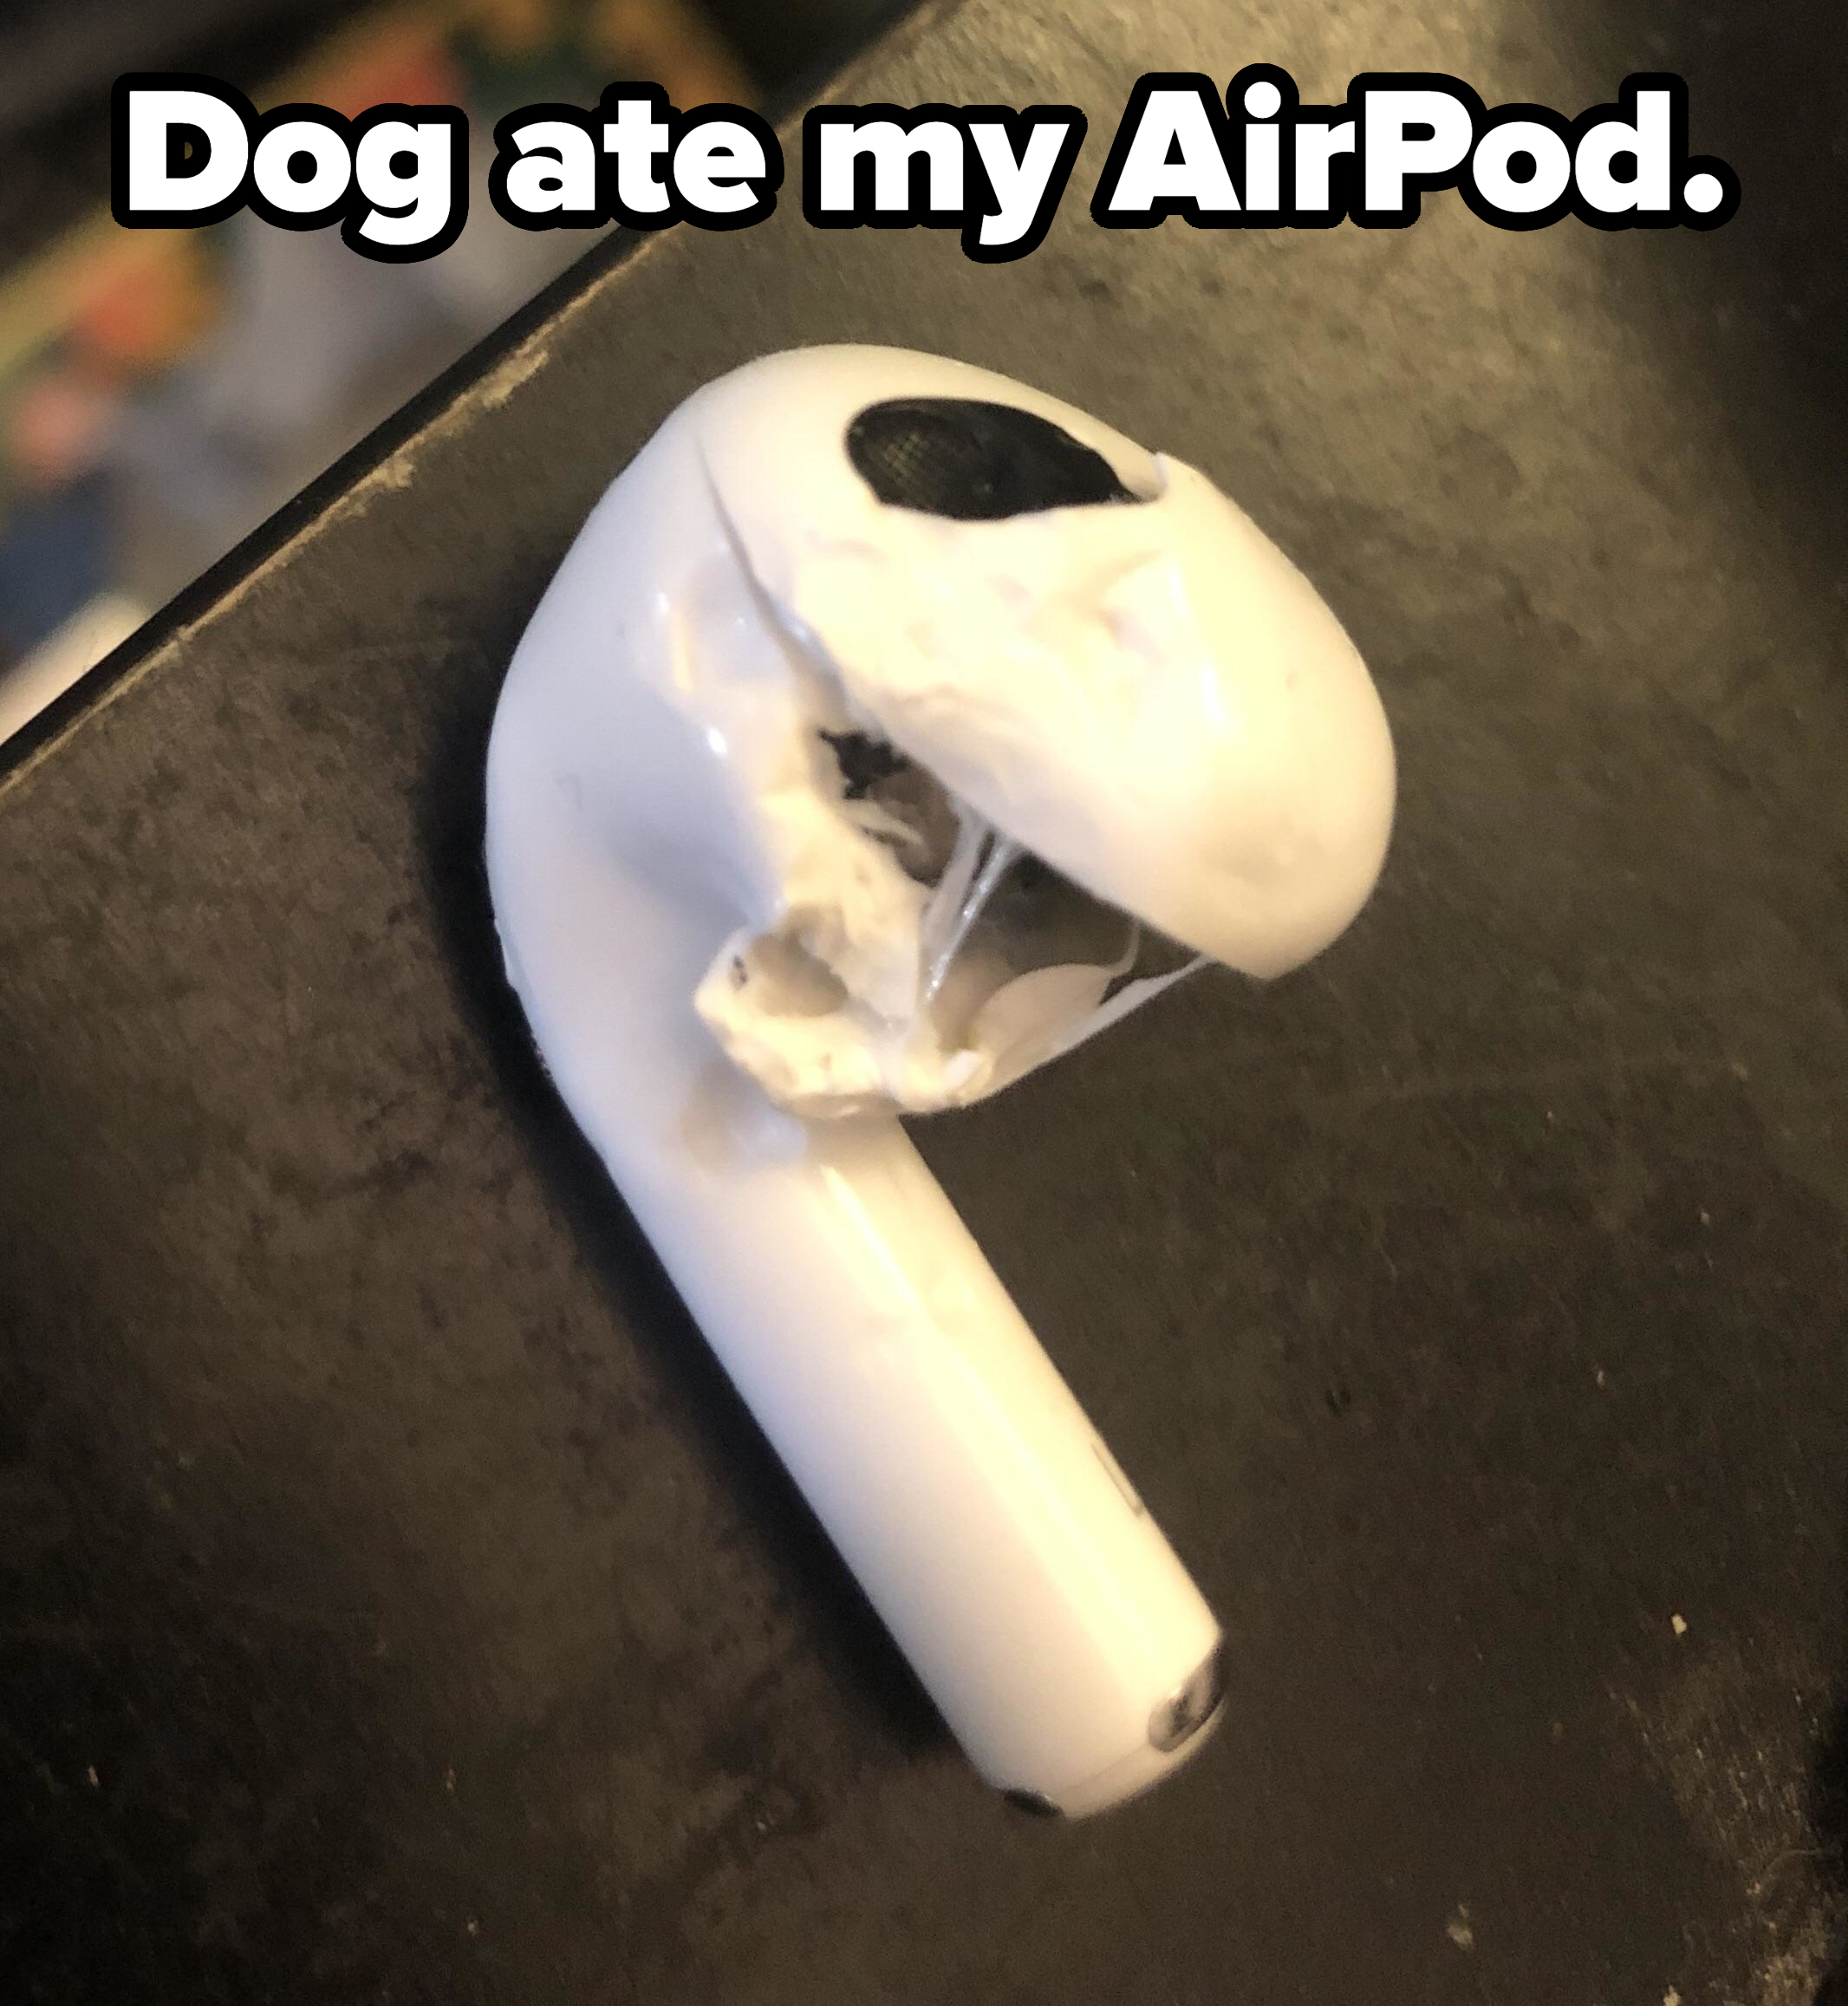 &quot;Dog ate my AirPod,&quot; showing a destroyed AirPod